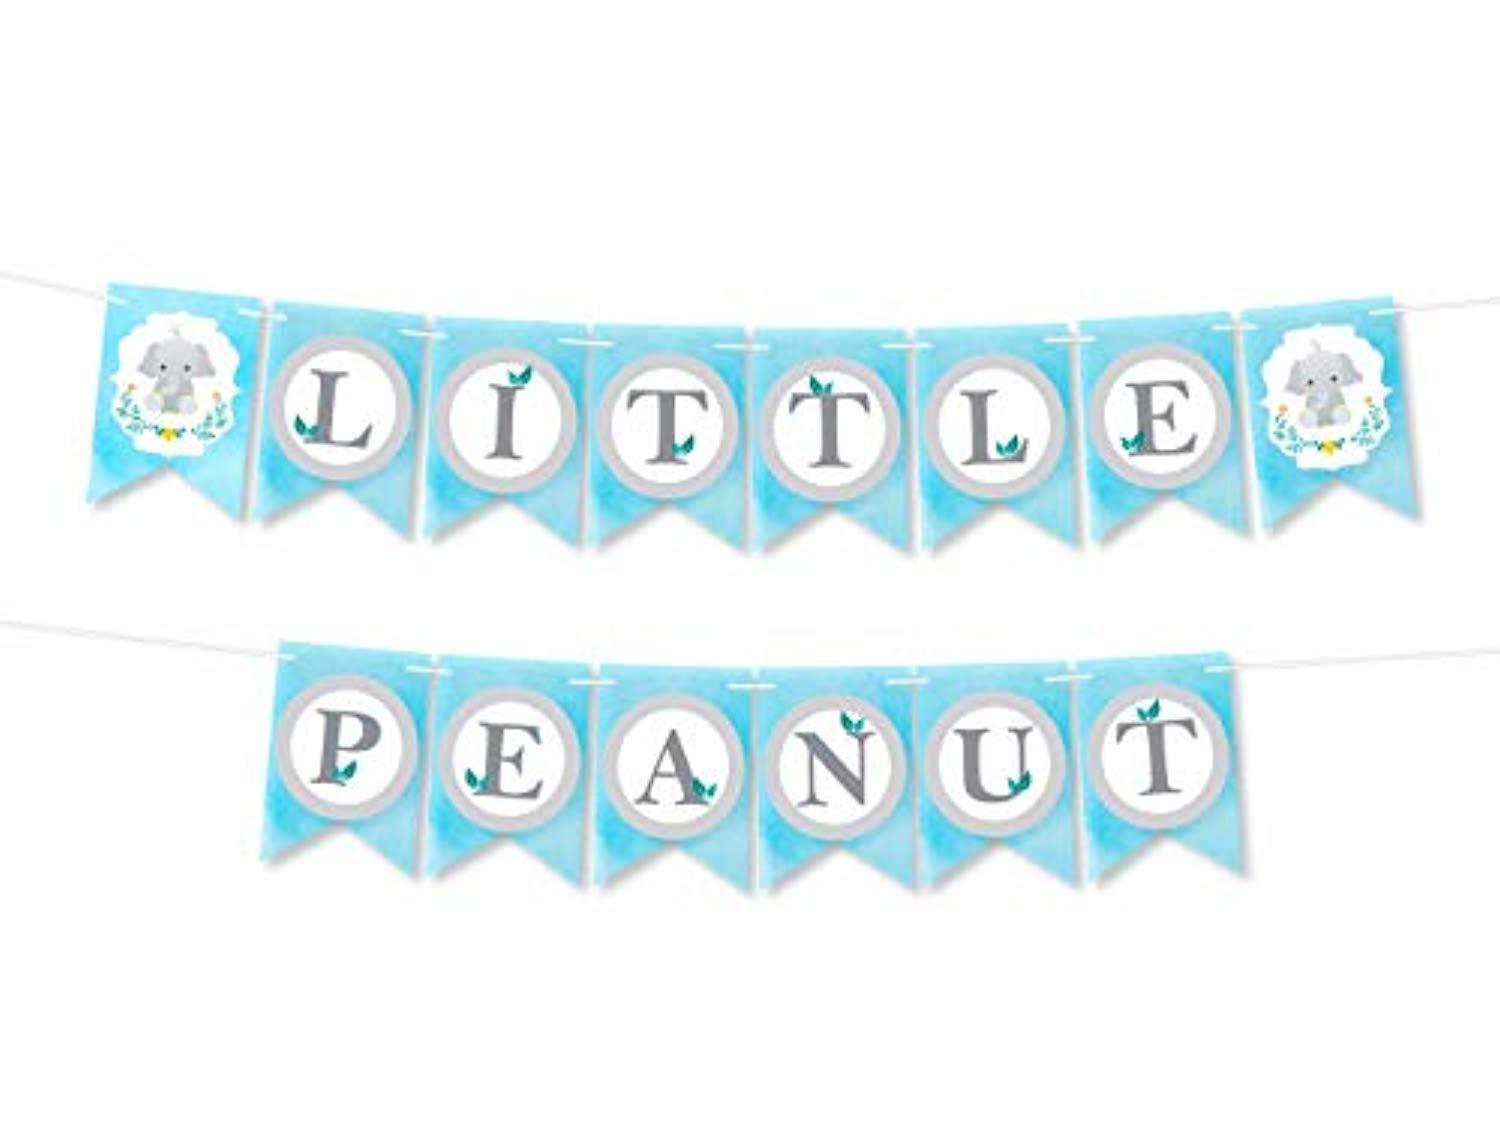 Little Baby Shower Boy Banner Decoration-Dumbo Party Supplies- Blue Party Home Party Kit-little Elephant Blue Baby Shower Banner Pennant Or Birthday Party Elephant Decor – CREATIVE COMPANY